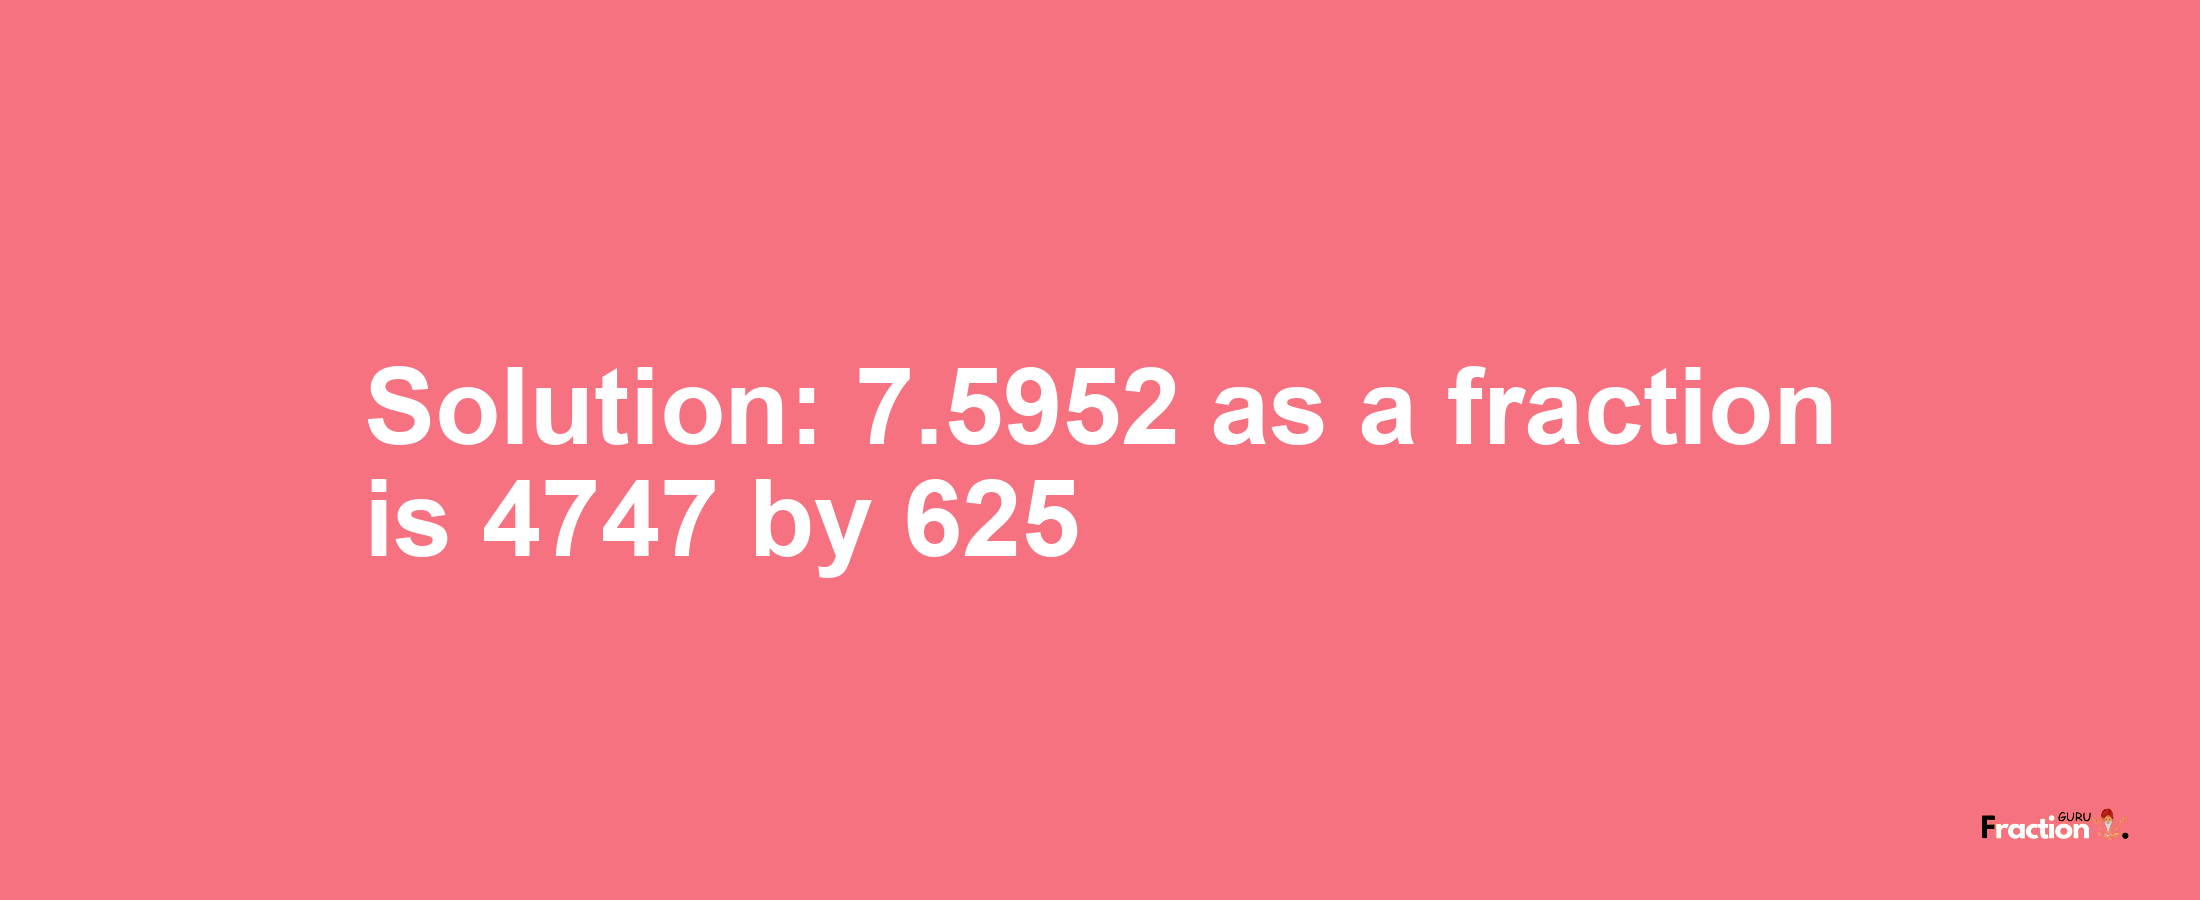 Solution:7.5952 as a fraction is 4747/625